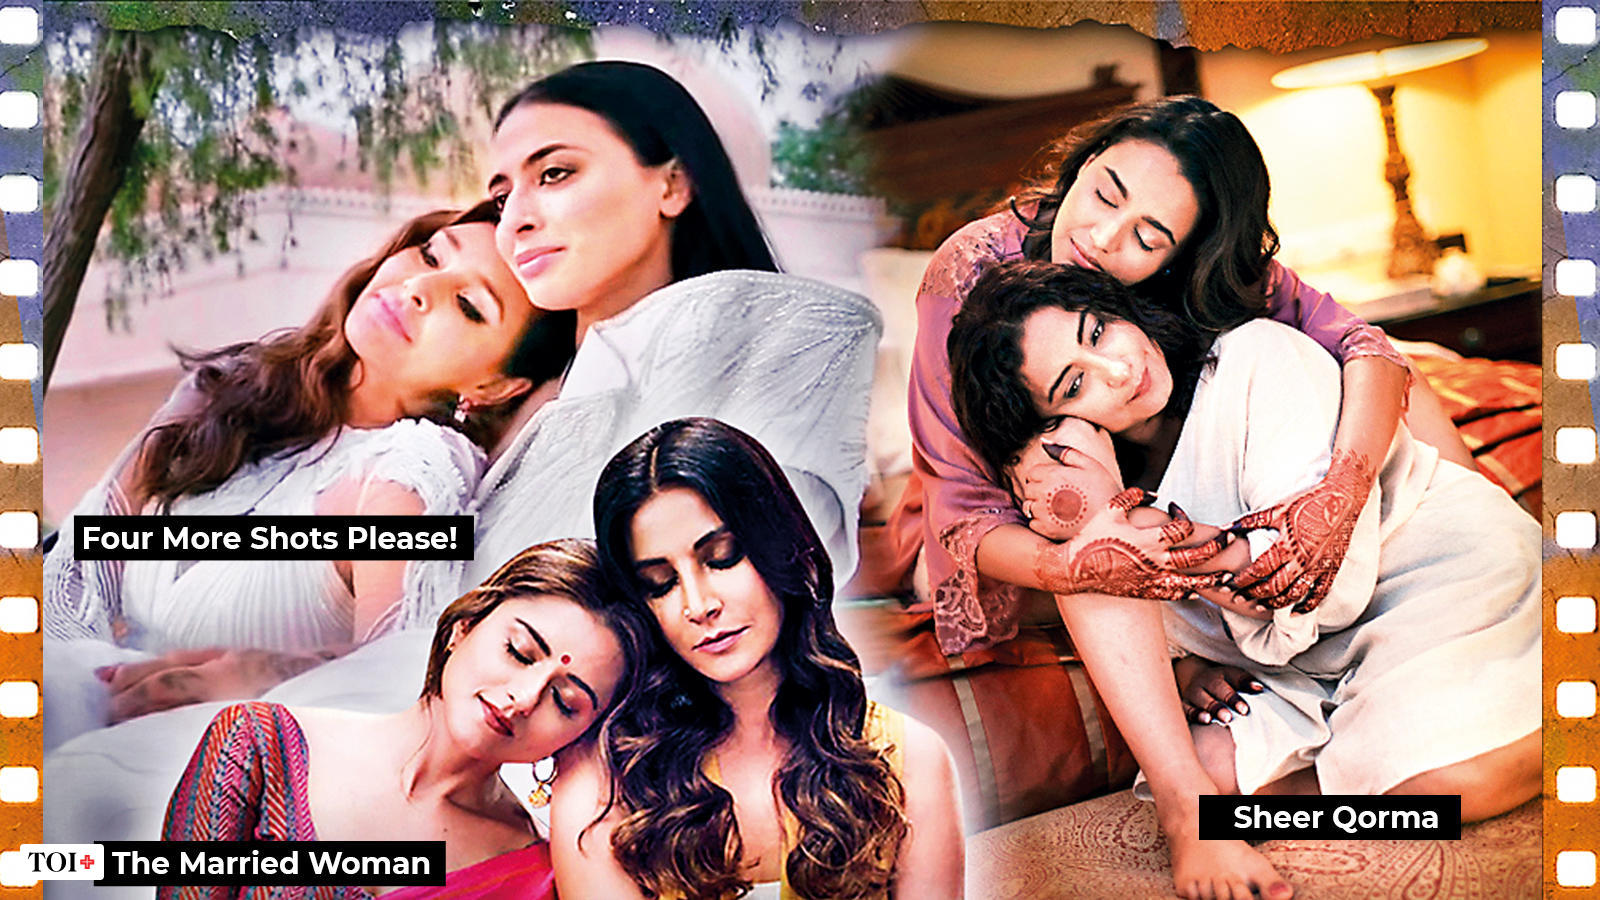 Lesbian love stories are blossoming on screen India News